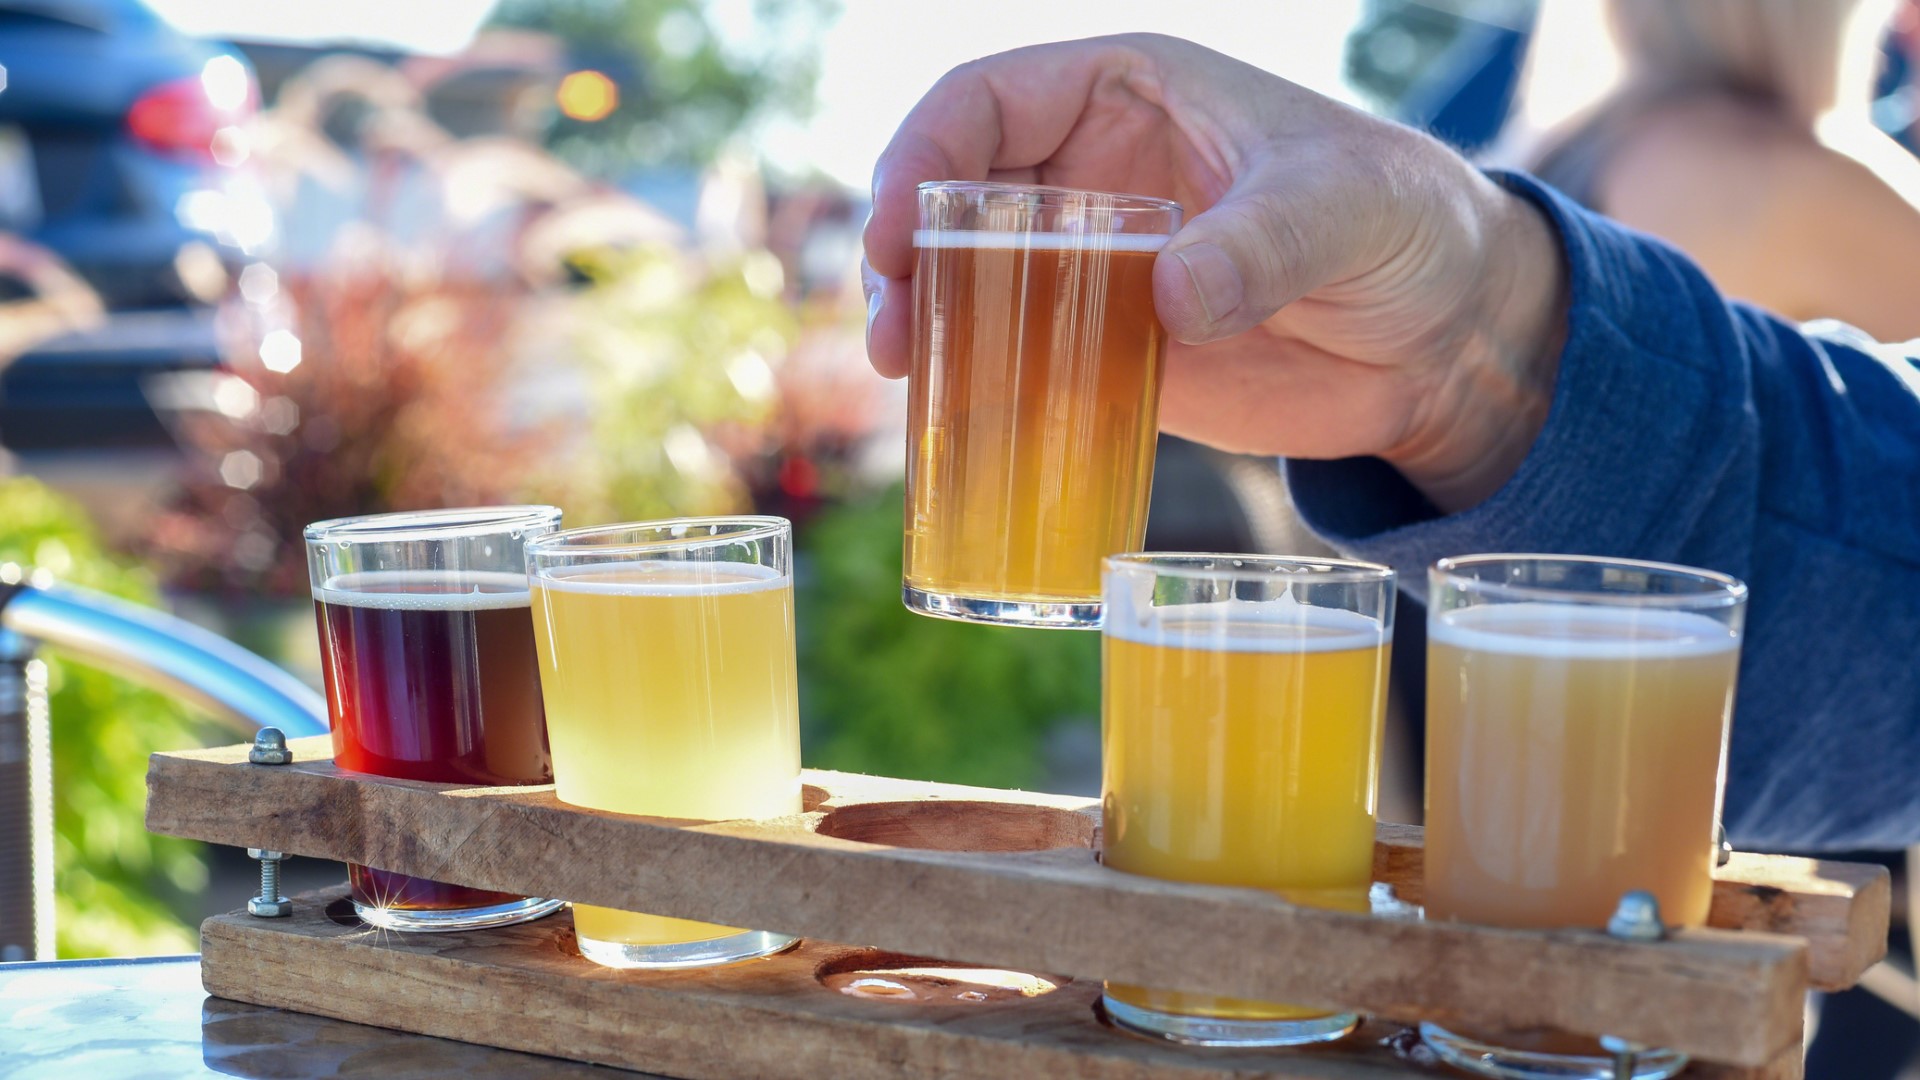 The promotion is run by Brew Barons Beer Trail, a year-round mobile experience designed to draw visitors to the more than 30 participating breweries in the area, 2.